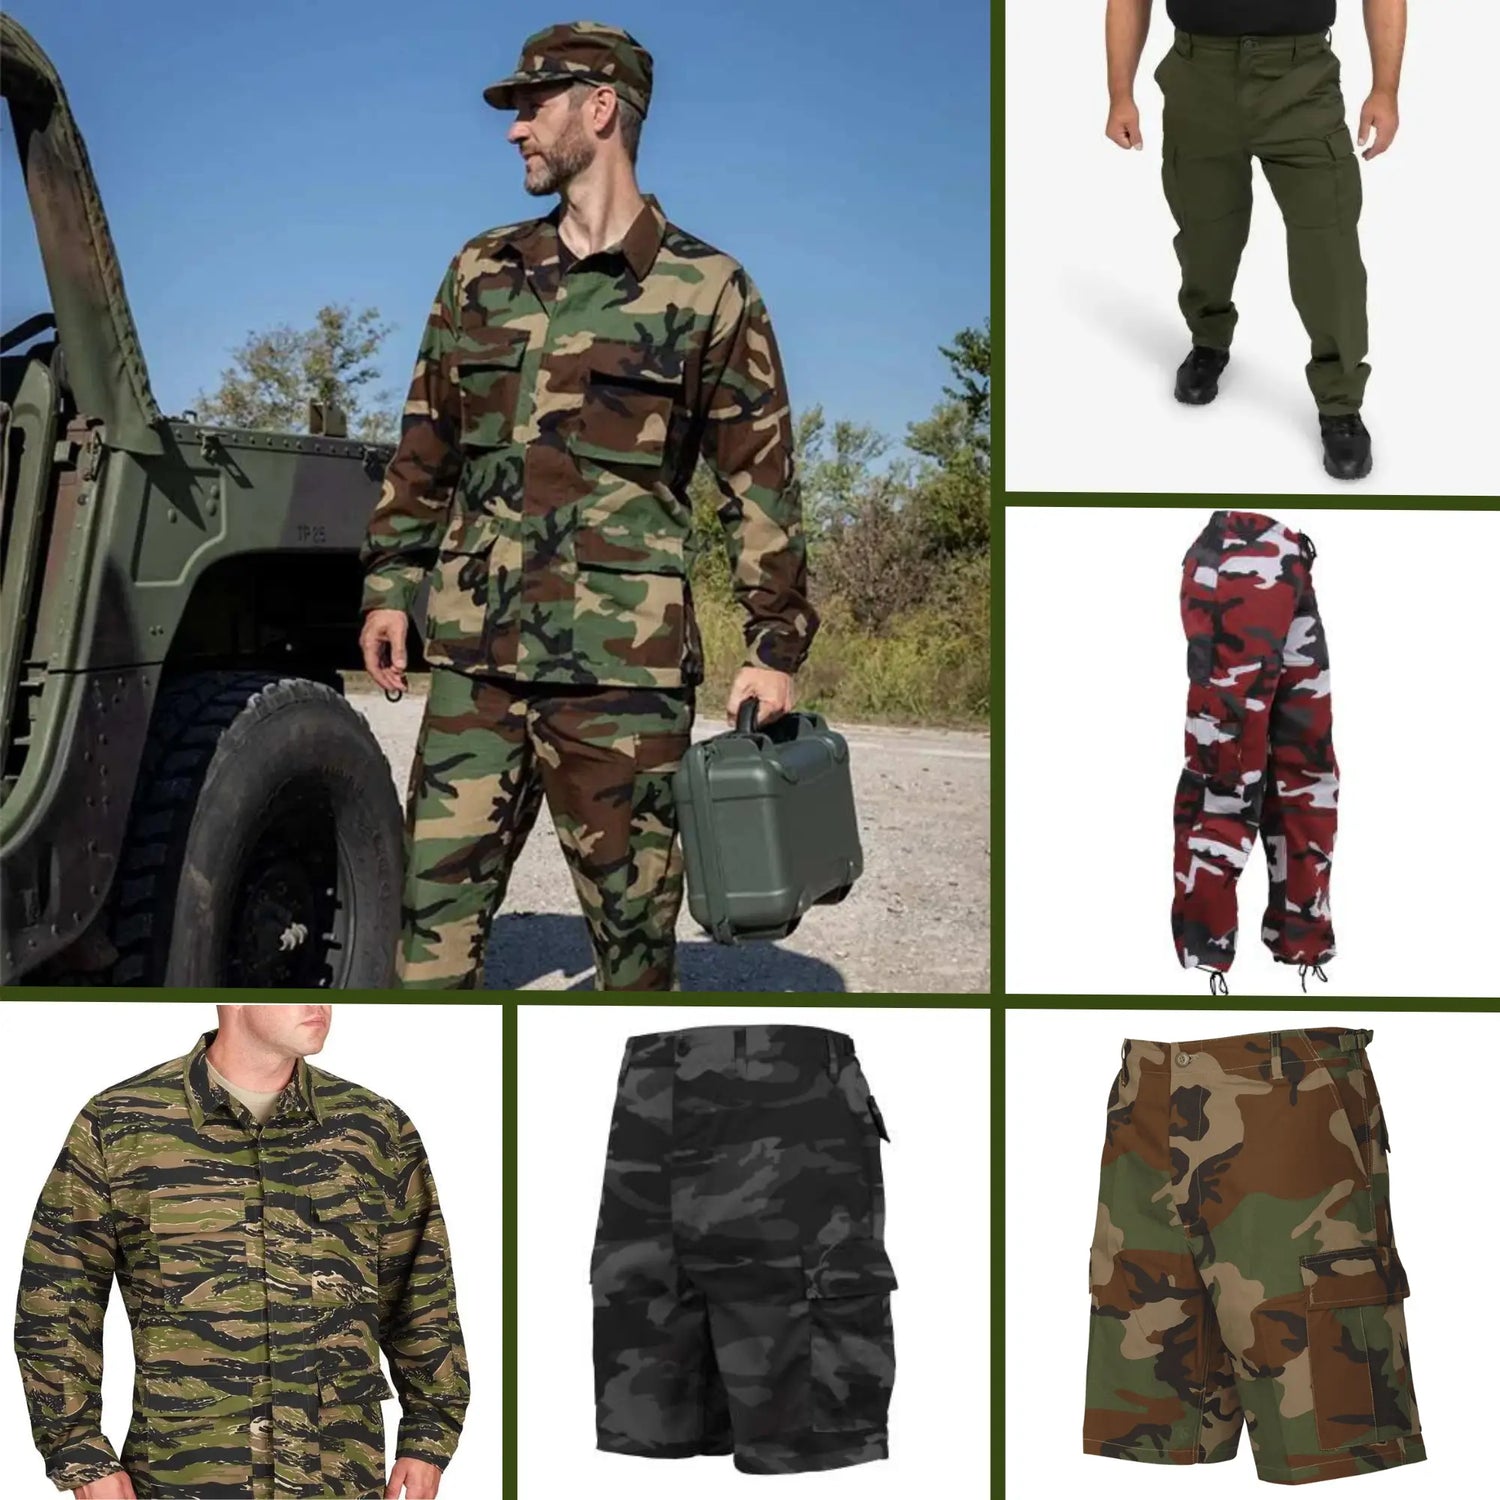 Army Navy Marine Store | Shop Military Surplus, Tactical & Survival